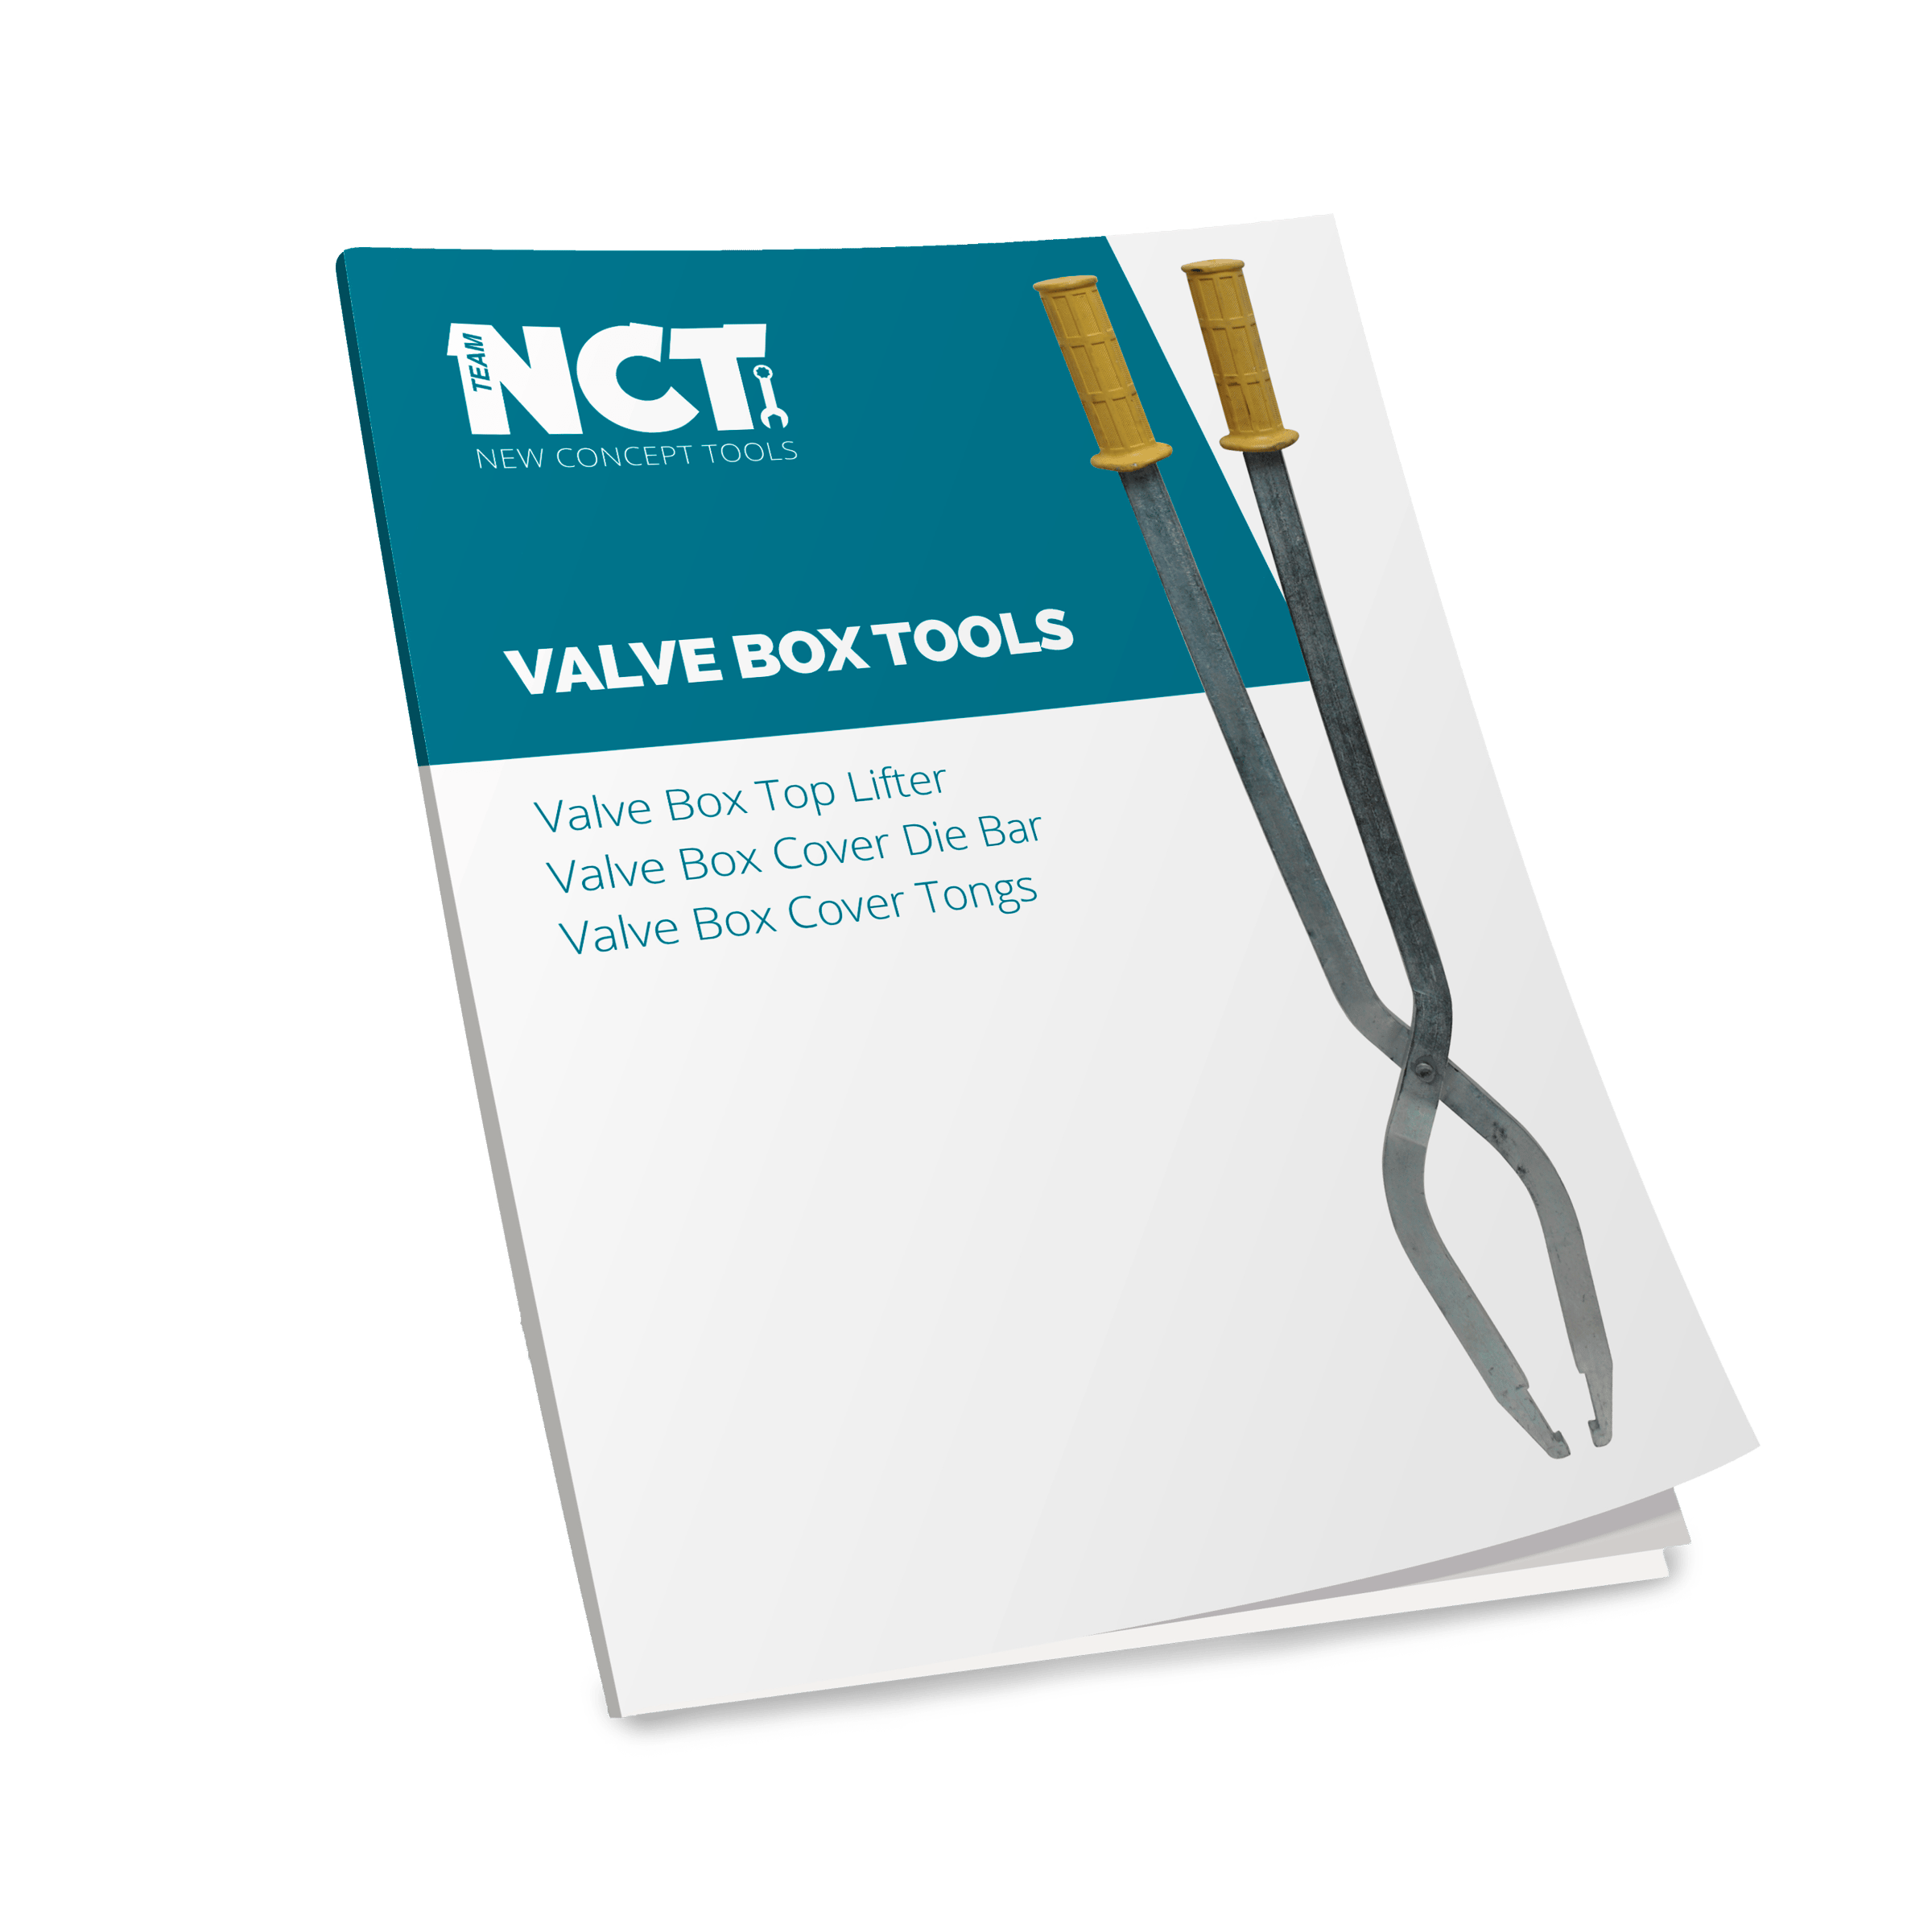 NCT Valve Box Tools Product Cover Book Cover